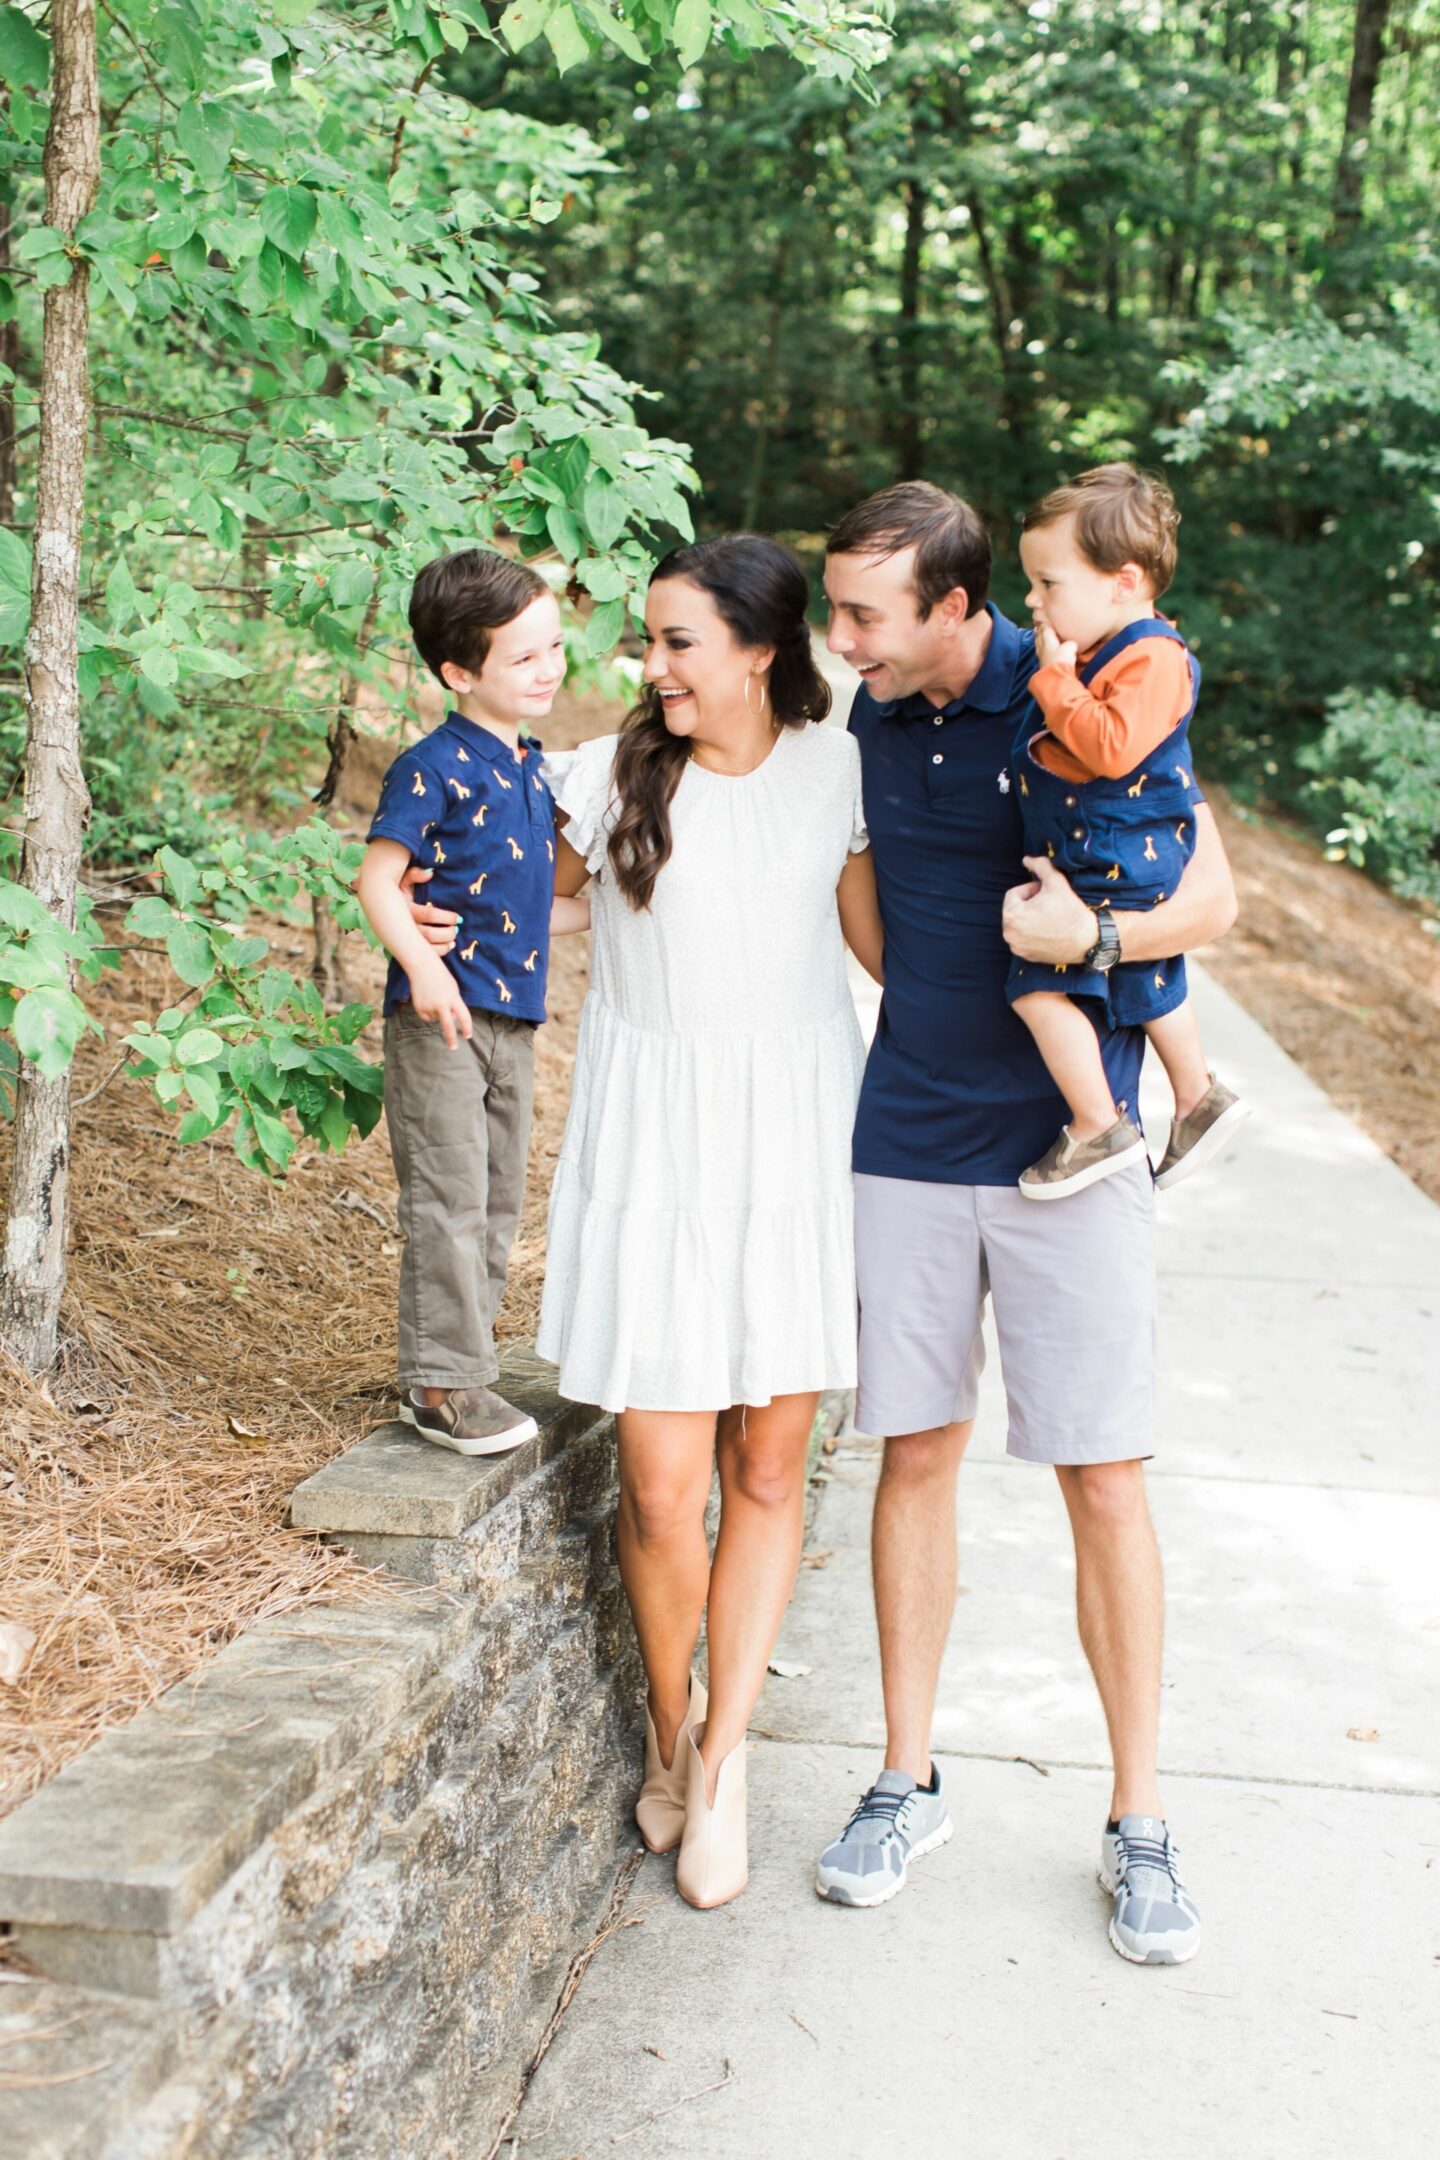 Heather Brown from HEALTHY by Heather Brown podcast and My Life Well Loved, shares health & wellness tips for busy moms looking to reconnect your relationships with a free 5 day devotional. 